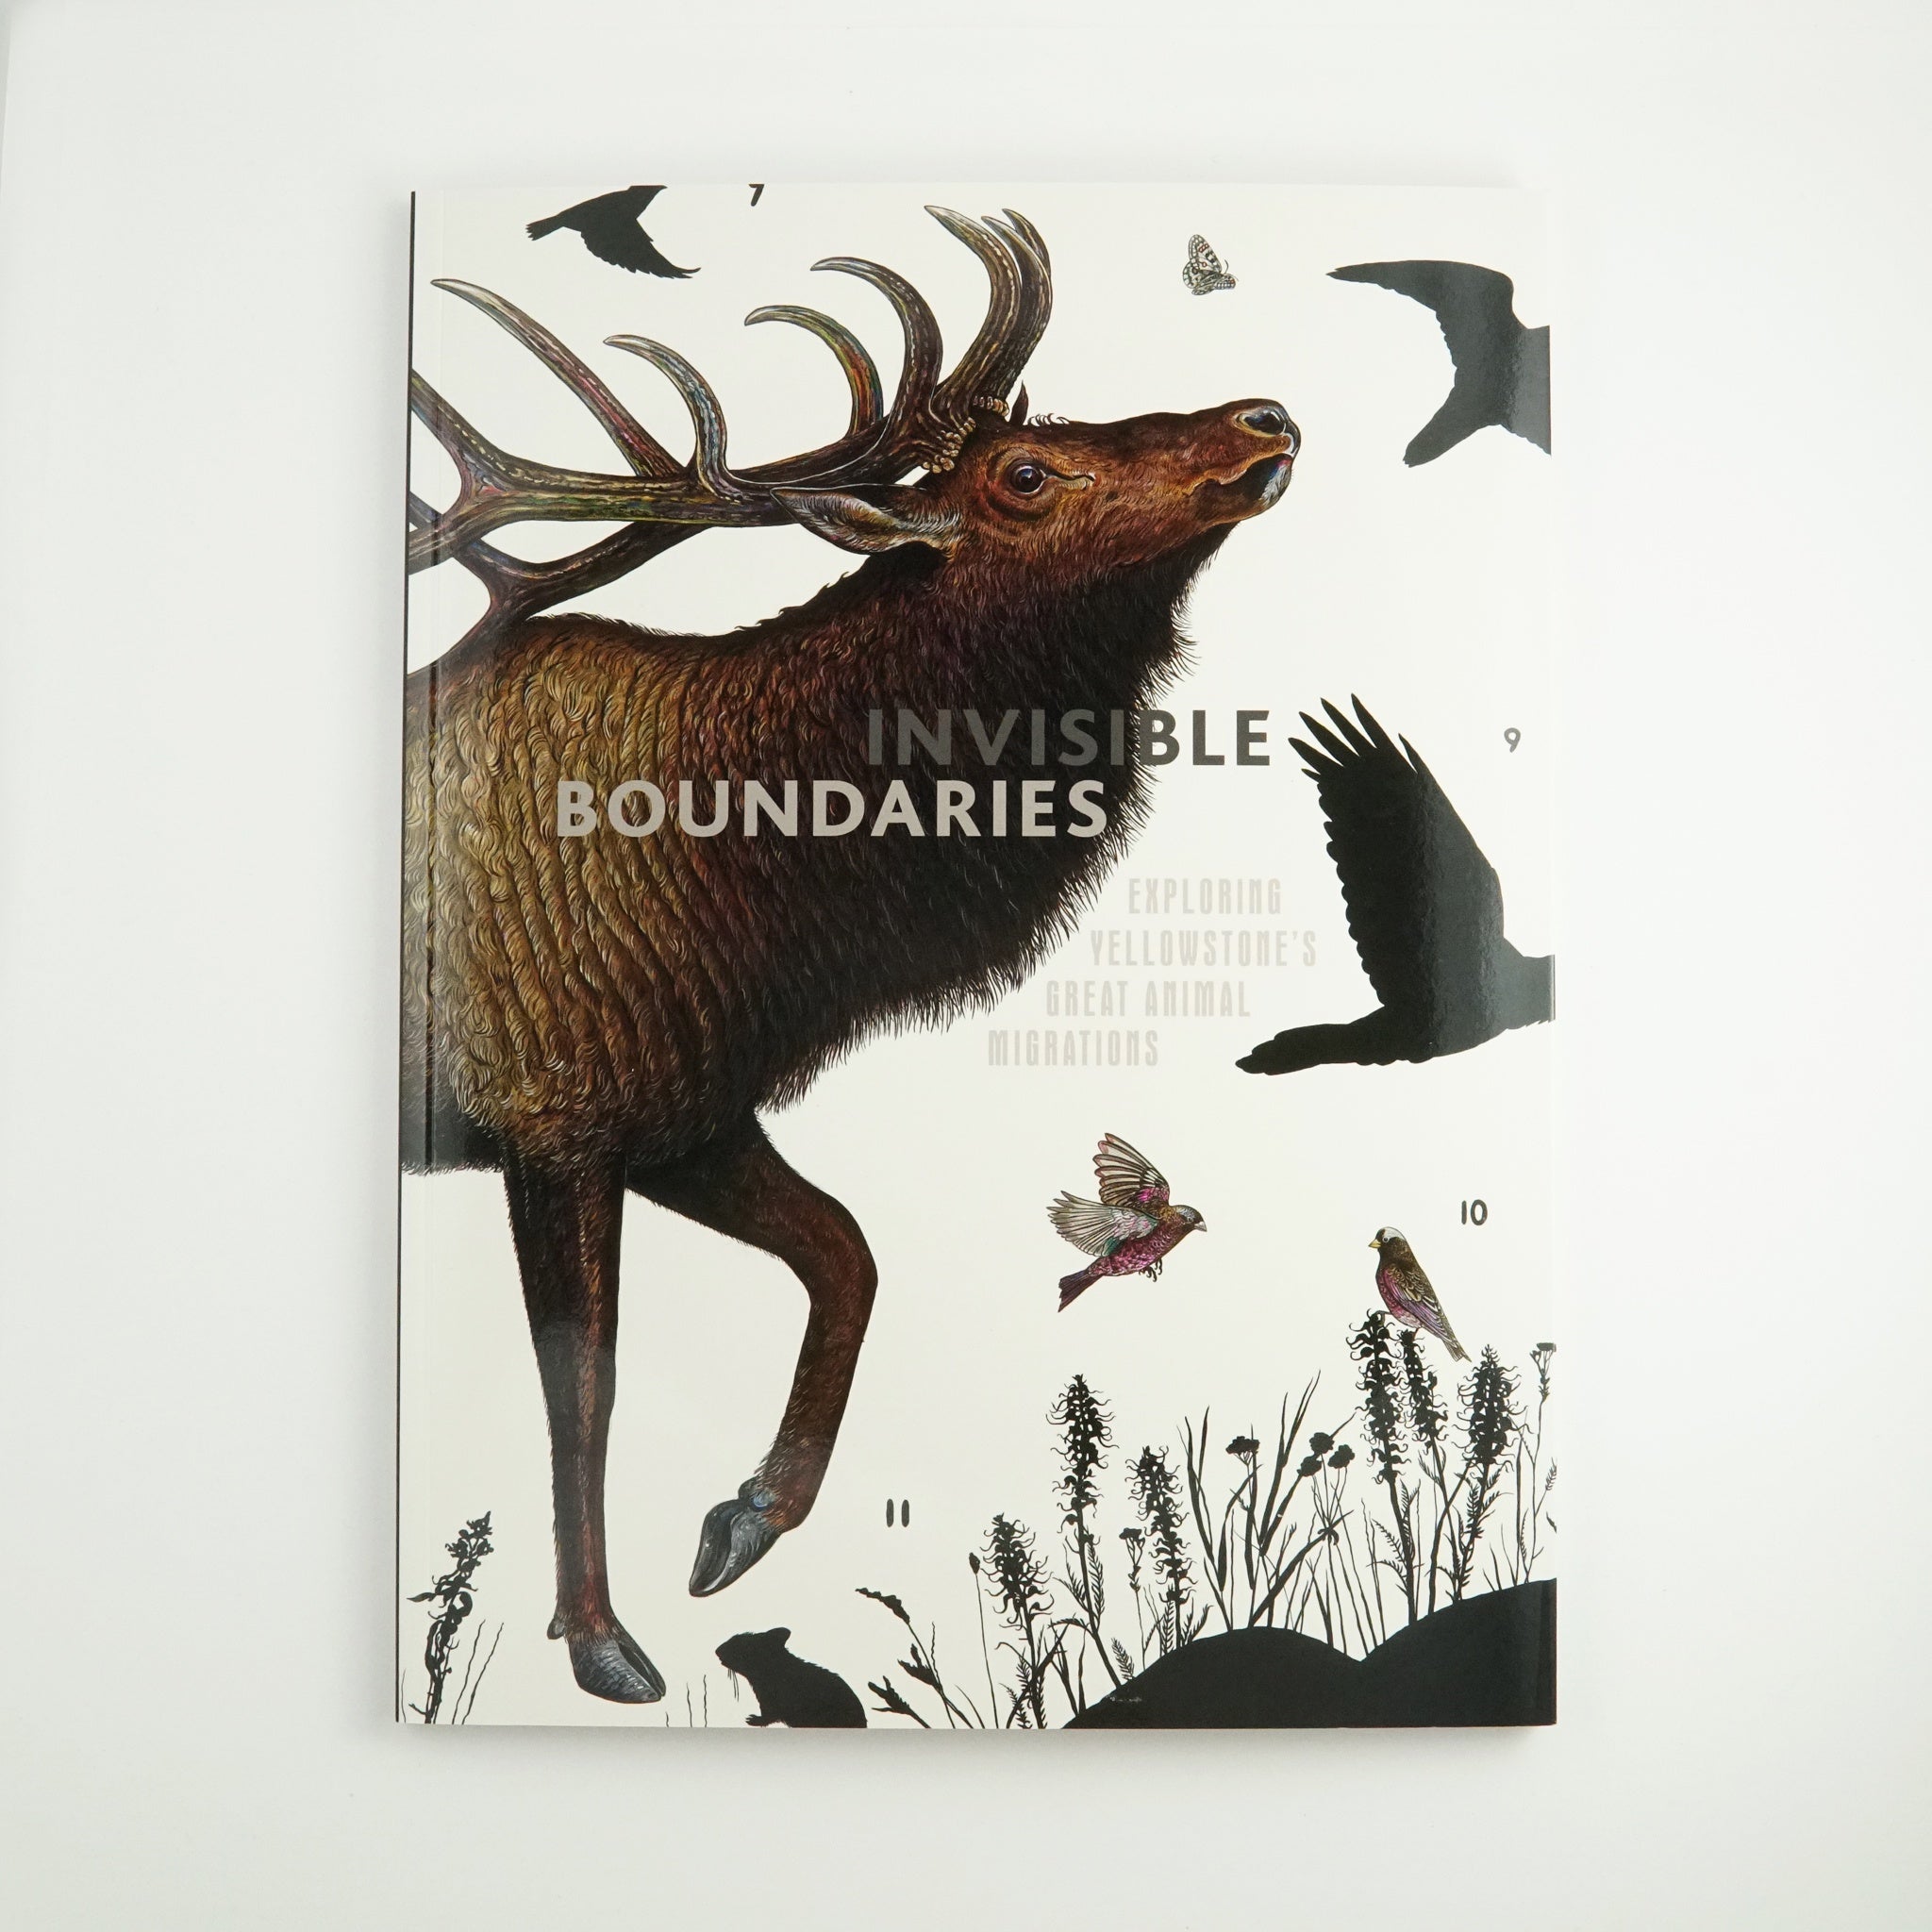 BK 10 INVISIBLE BOUNDARIES: EXPLORING YELLOWSTONE'S GREAT ANIMAL MIGRATIONS BY BBCW #21043246